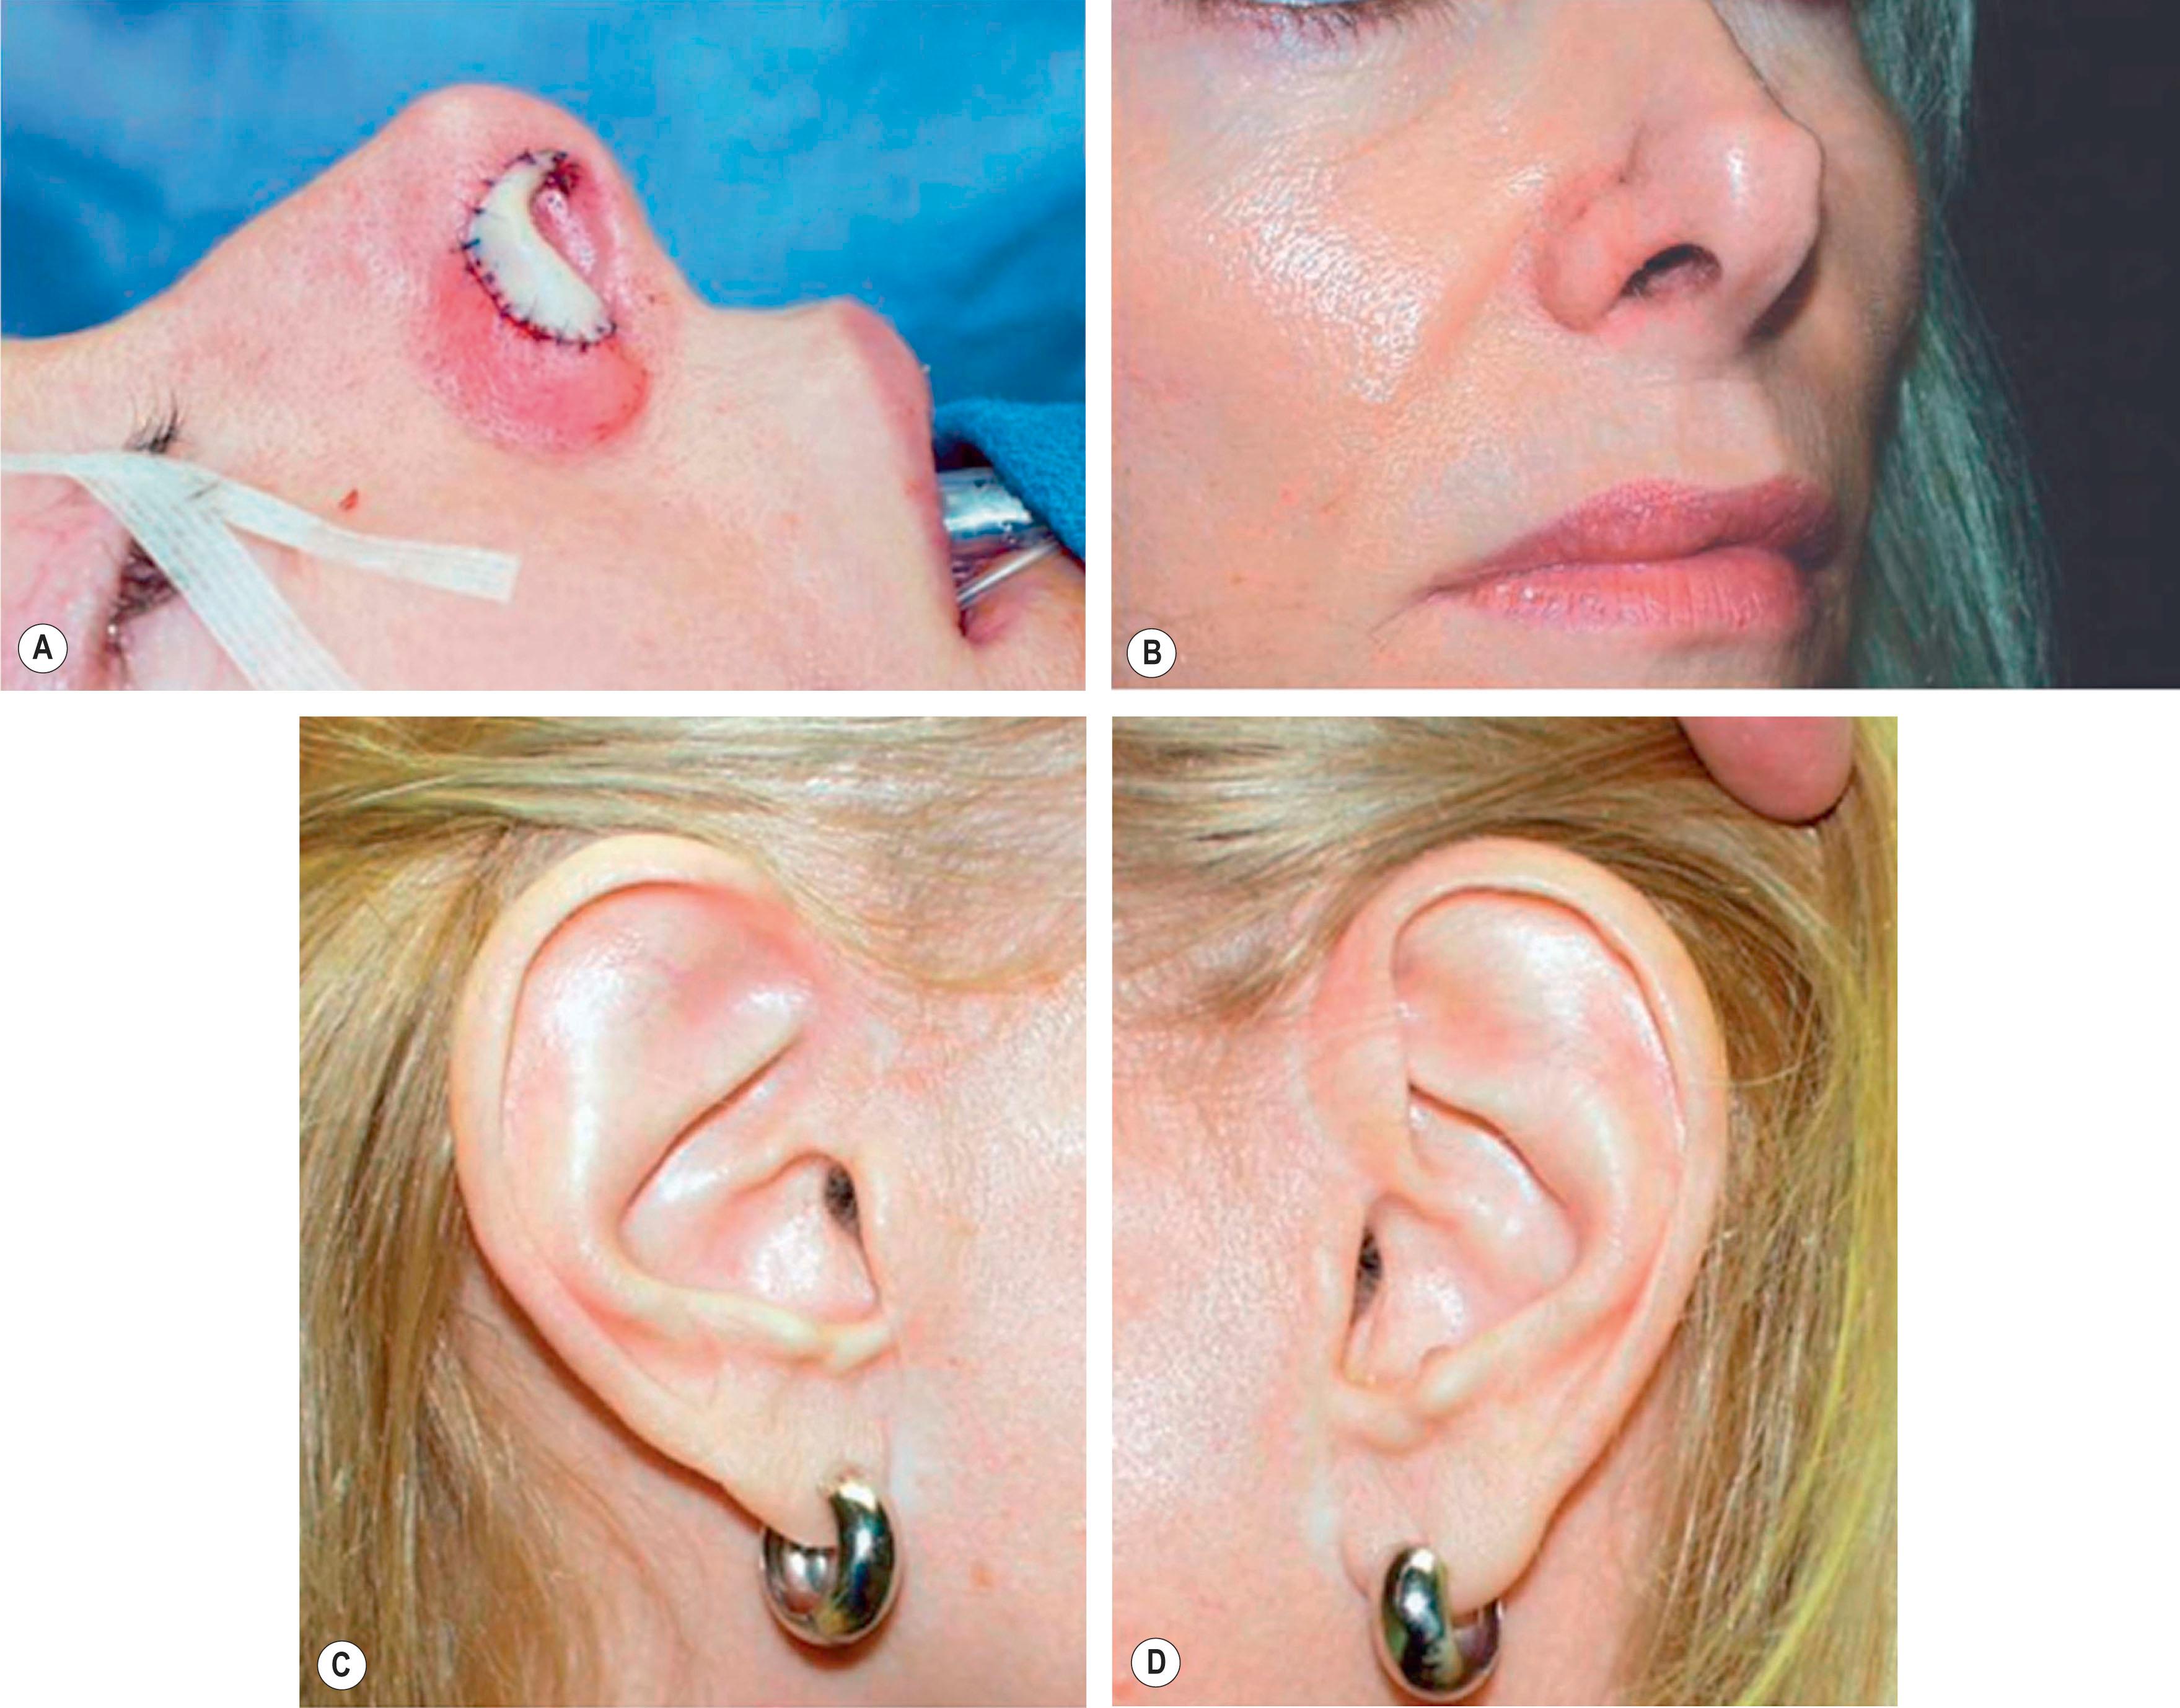 Figure 19.8, Technique 4: (A,B) Inset of graft and aesthetic outcomes of nasal reconstruction and (C) the auricular donor site in comparison with (D) the contralateral ear.